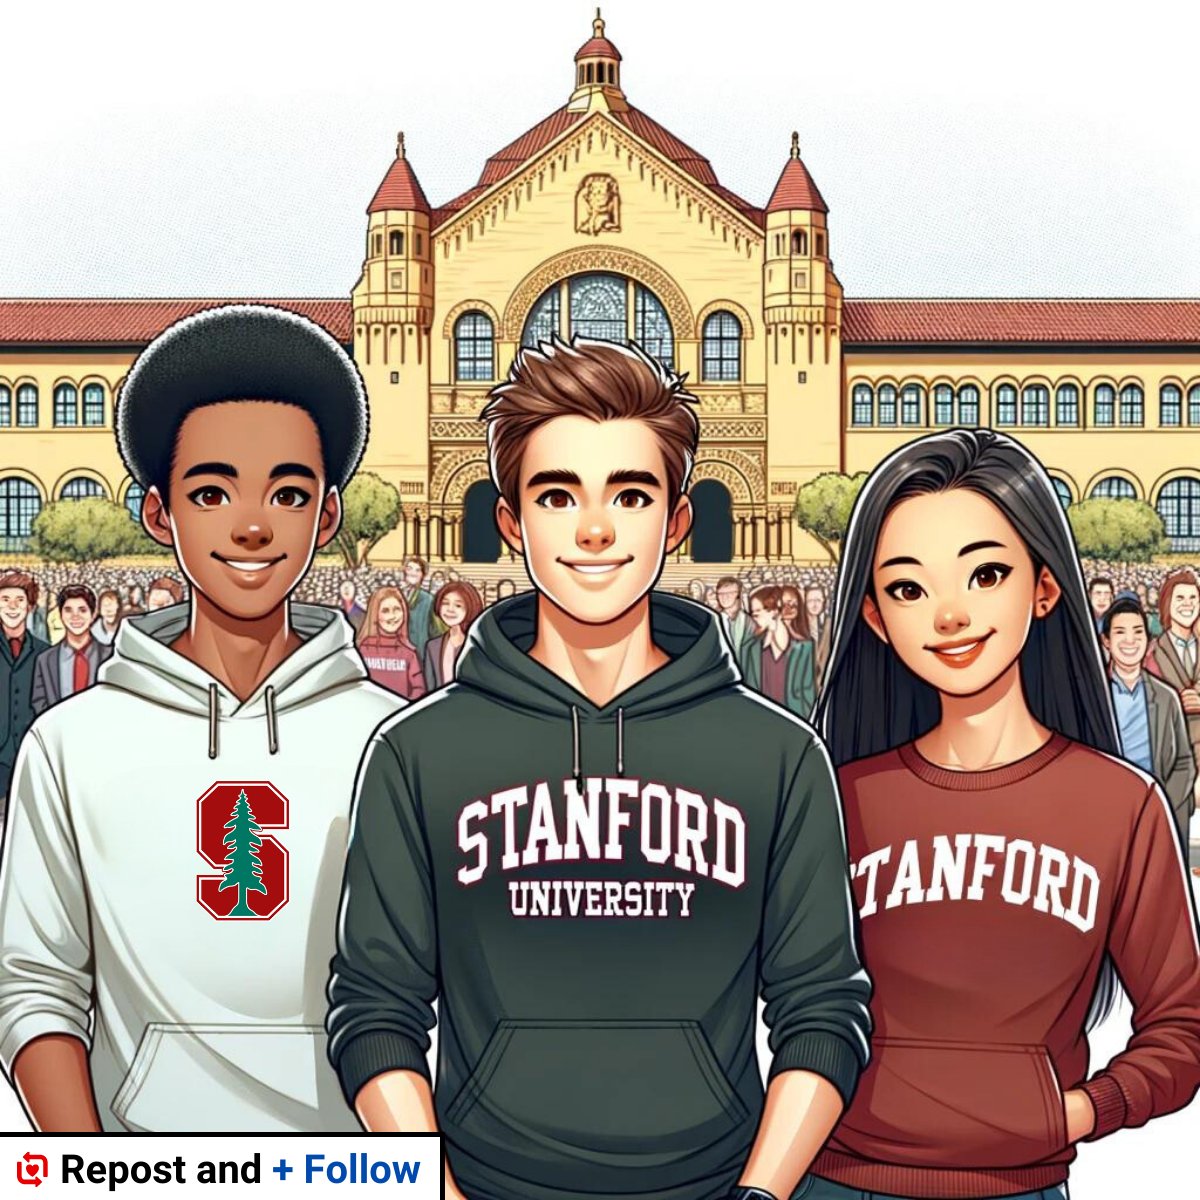 Stanford University is offering free online courses.

No applications, fees to pay, or textbooks to buy.

Here are 10 FREE courses you don't want to miss:

{ Thread 🧵 }